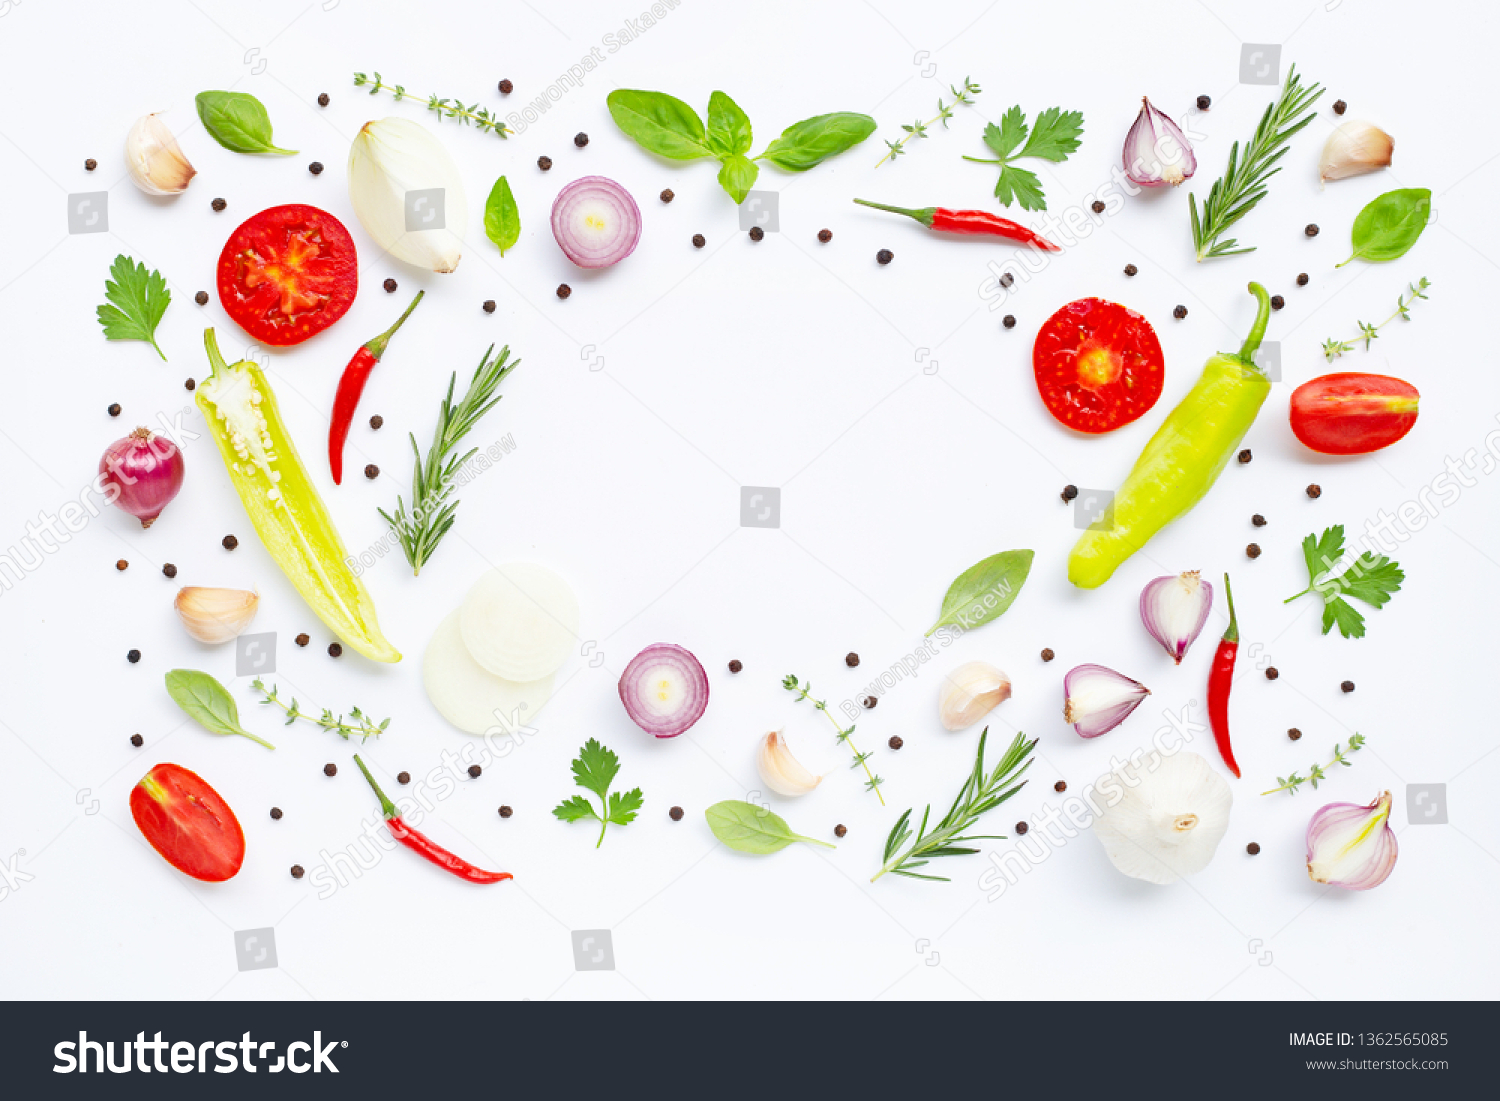 Various fresh vegetables and herbs on white background. Healthy eating concept #1362565085